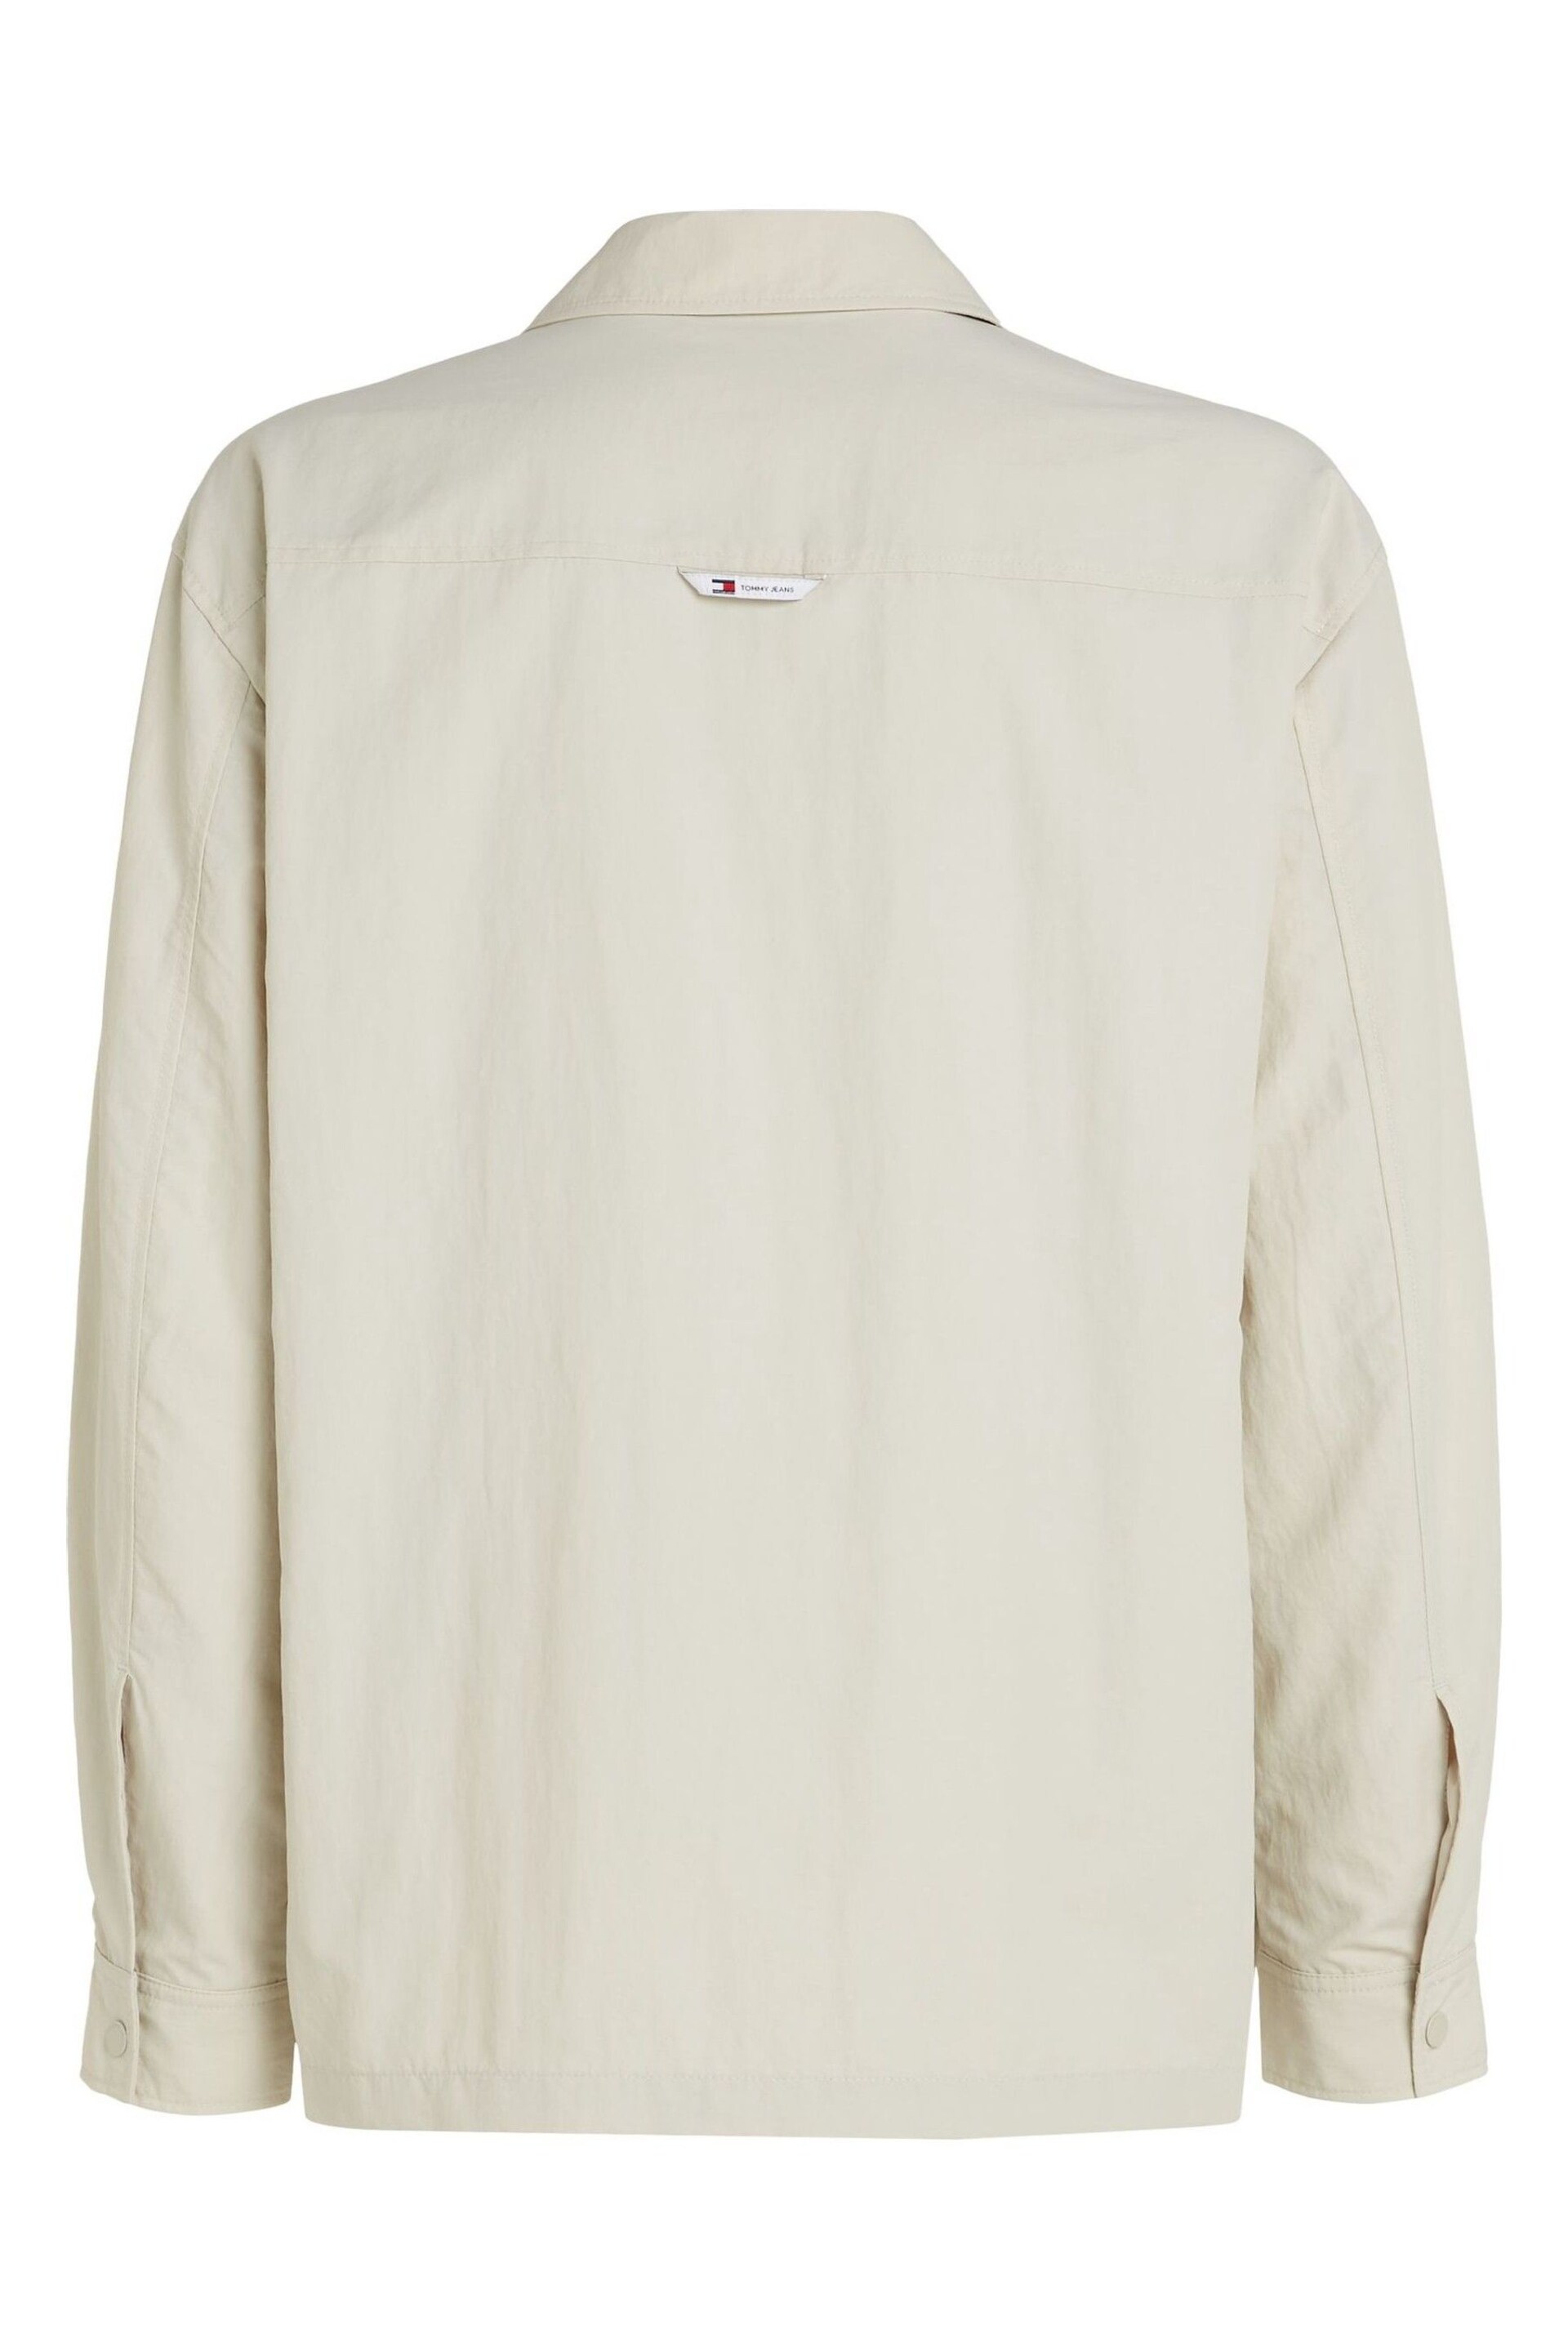 Tommy Jeans Cream/White Colourblock Shirt - Image 5 of 6